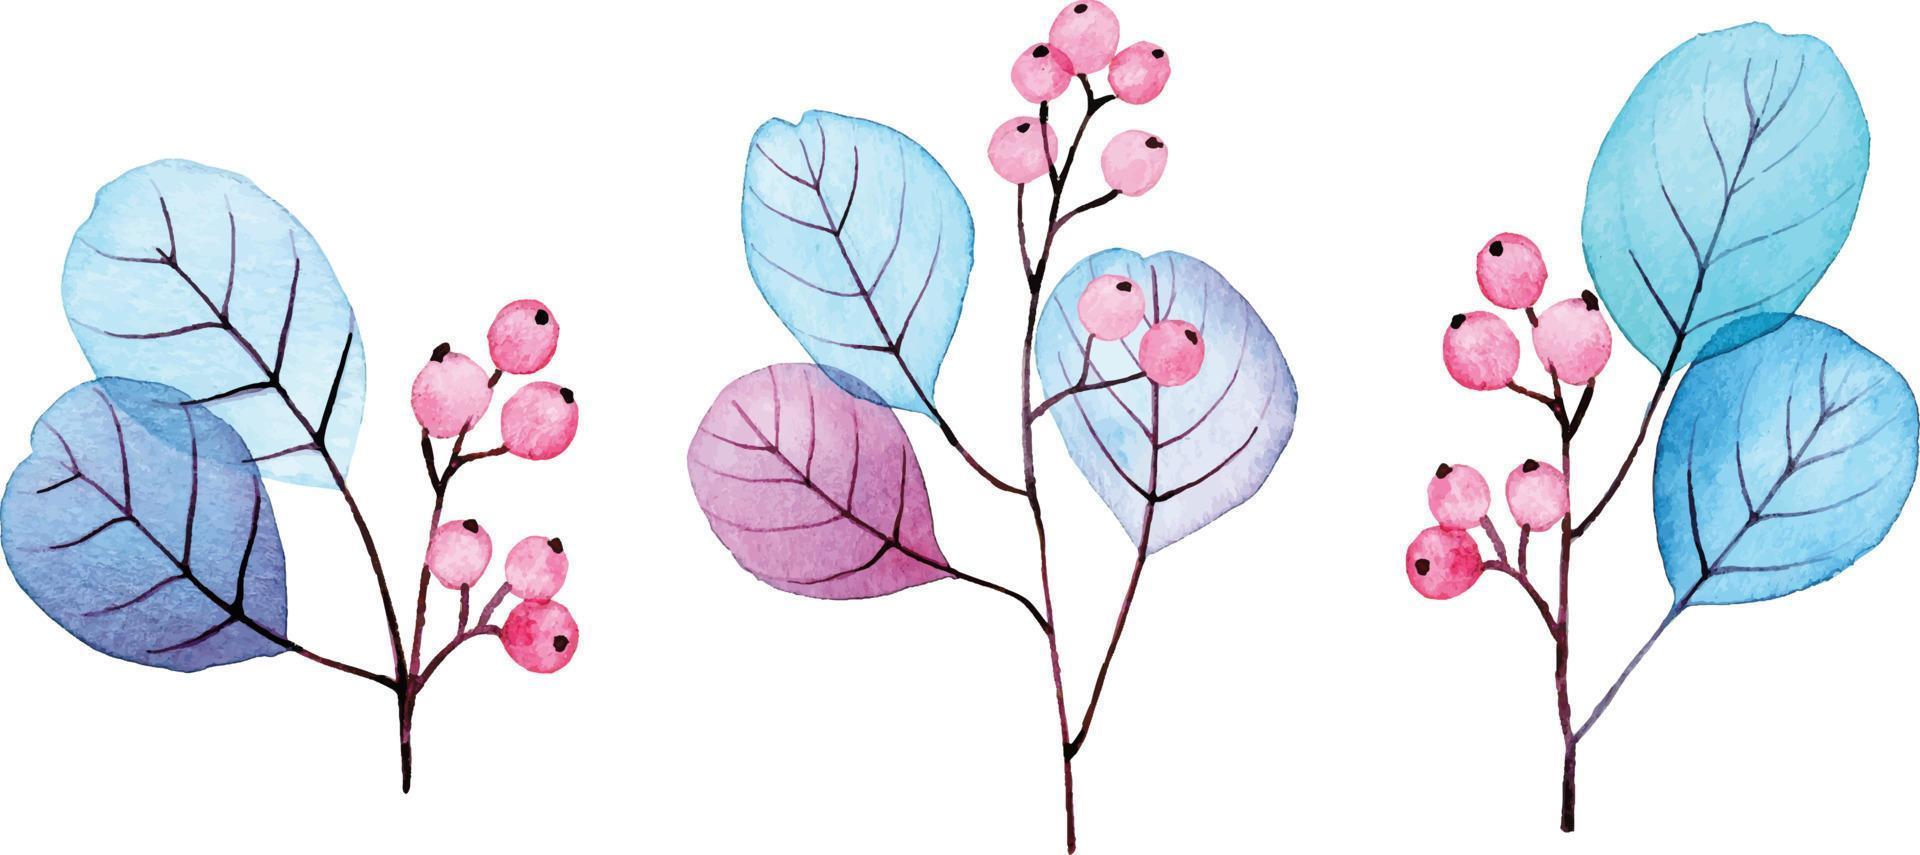 watercolor drawing. set of transparent eucalyptus leaves and blue and pink berries. abstract leaves and branches. collection for wedding decoration, greeting card vector